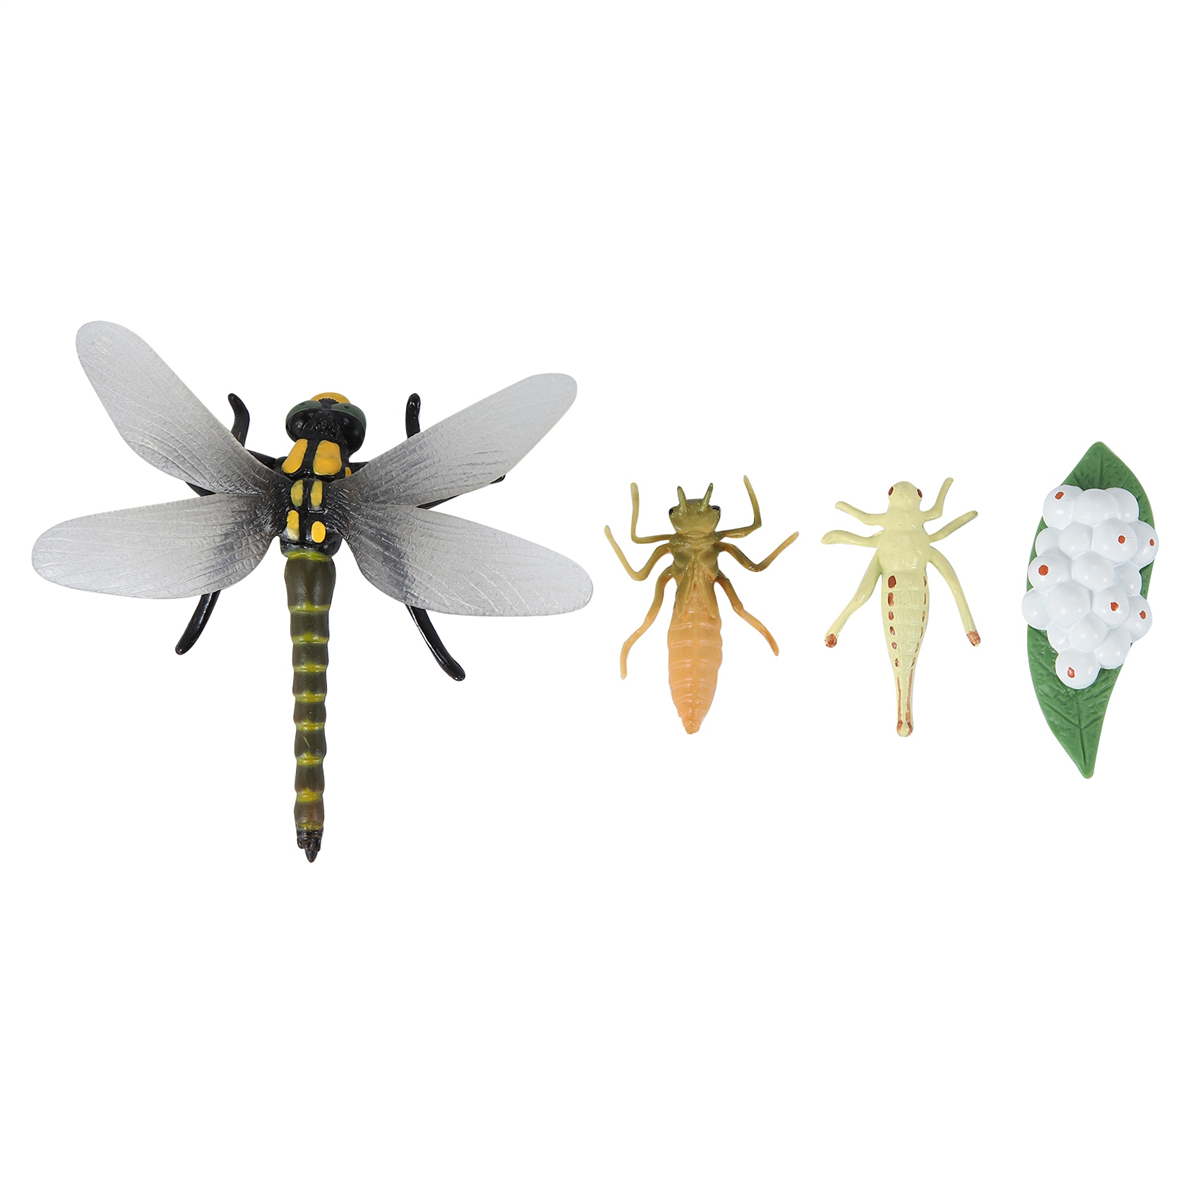 Life Cycle of A Dragonfly Insects Life Cycles Growth Model Children Animal